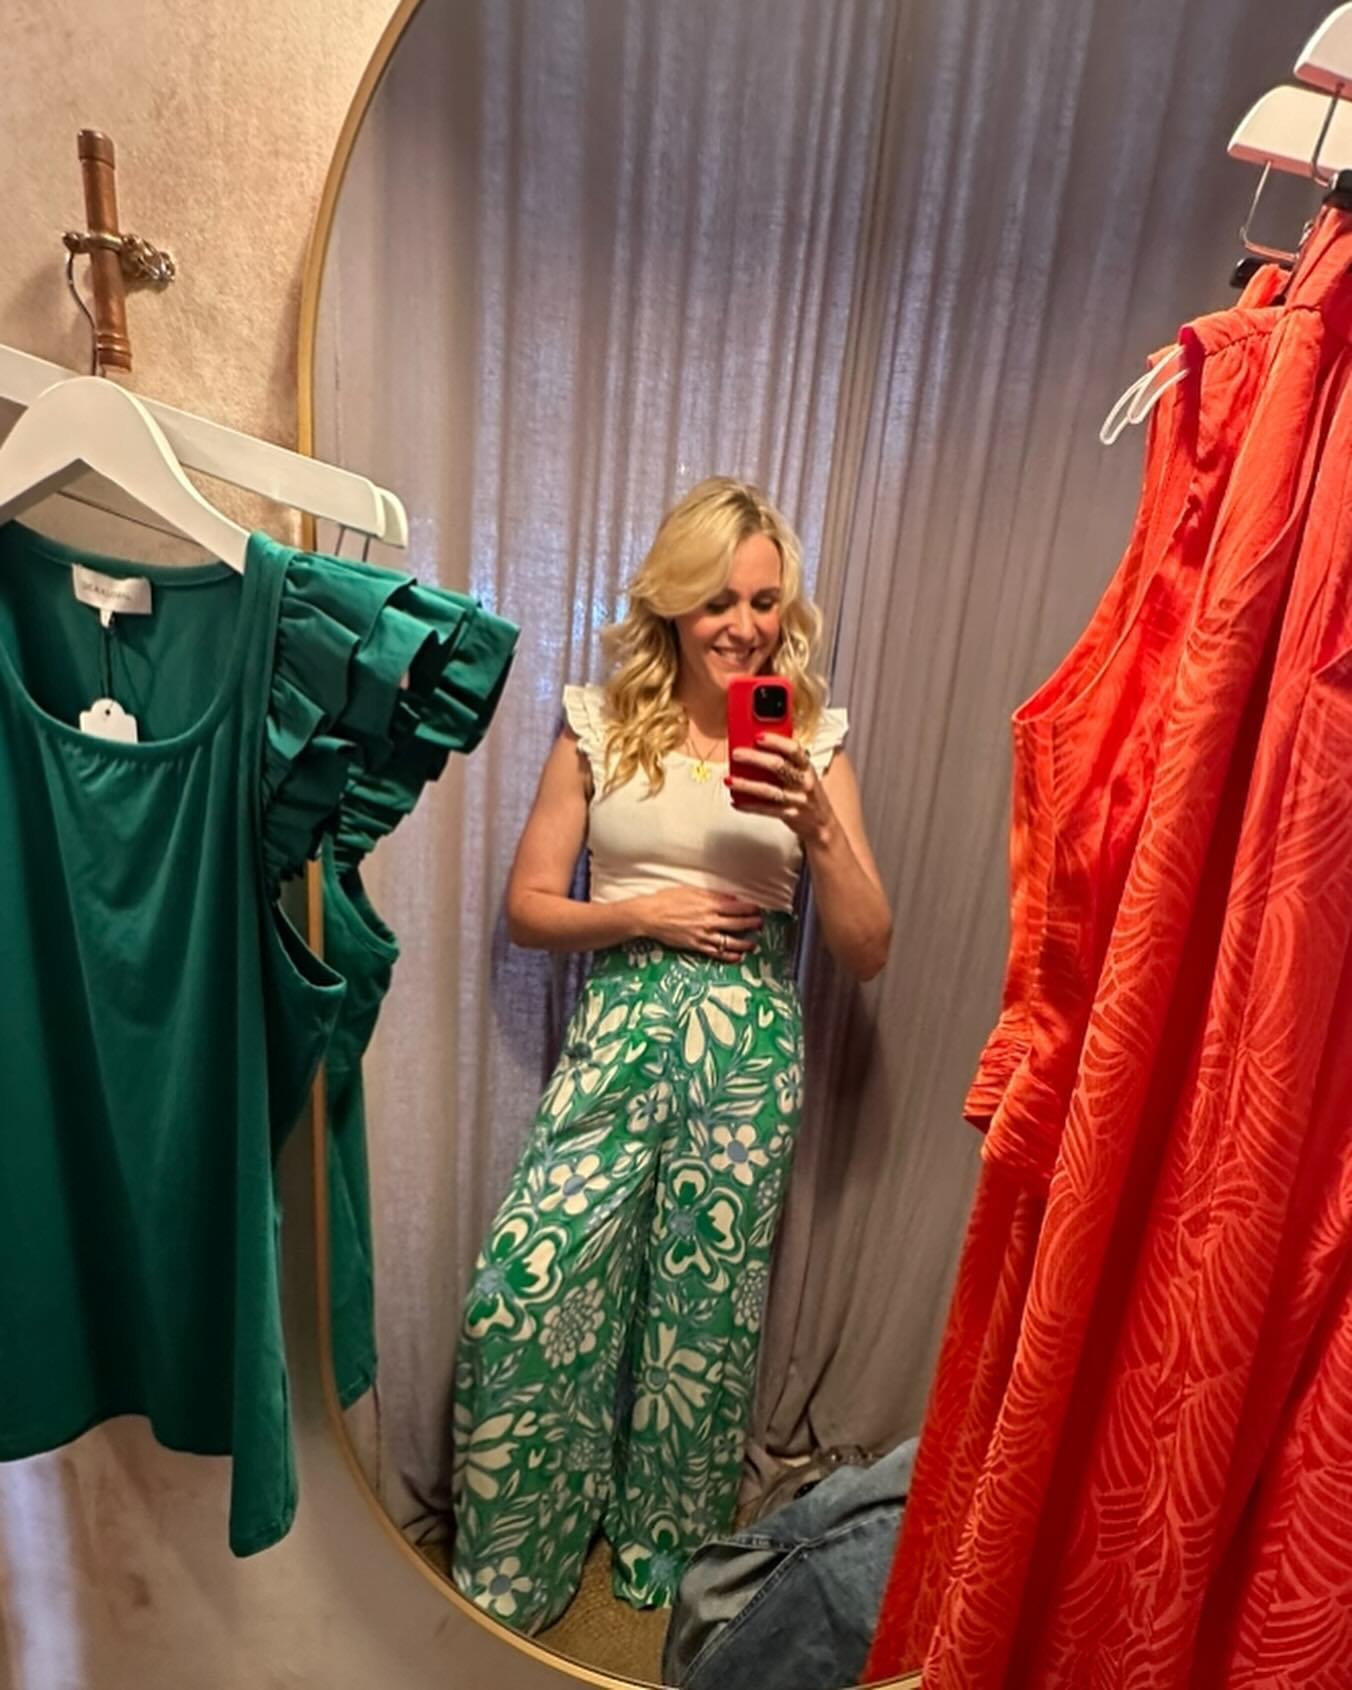 Loving exploring my new local area and all the amazing clothing boutiques! I loved so many things in @damselboutique in Chiswick- so many beautiful things!! Almost came home with the green palazzo trousers but they were slightly too big. Also loved t